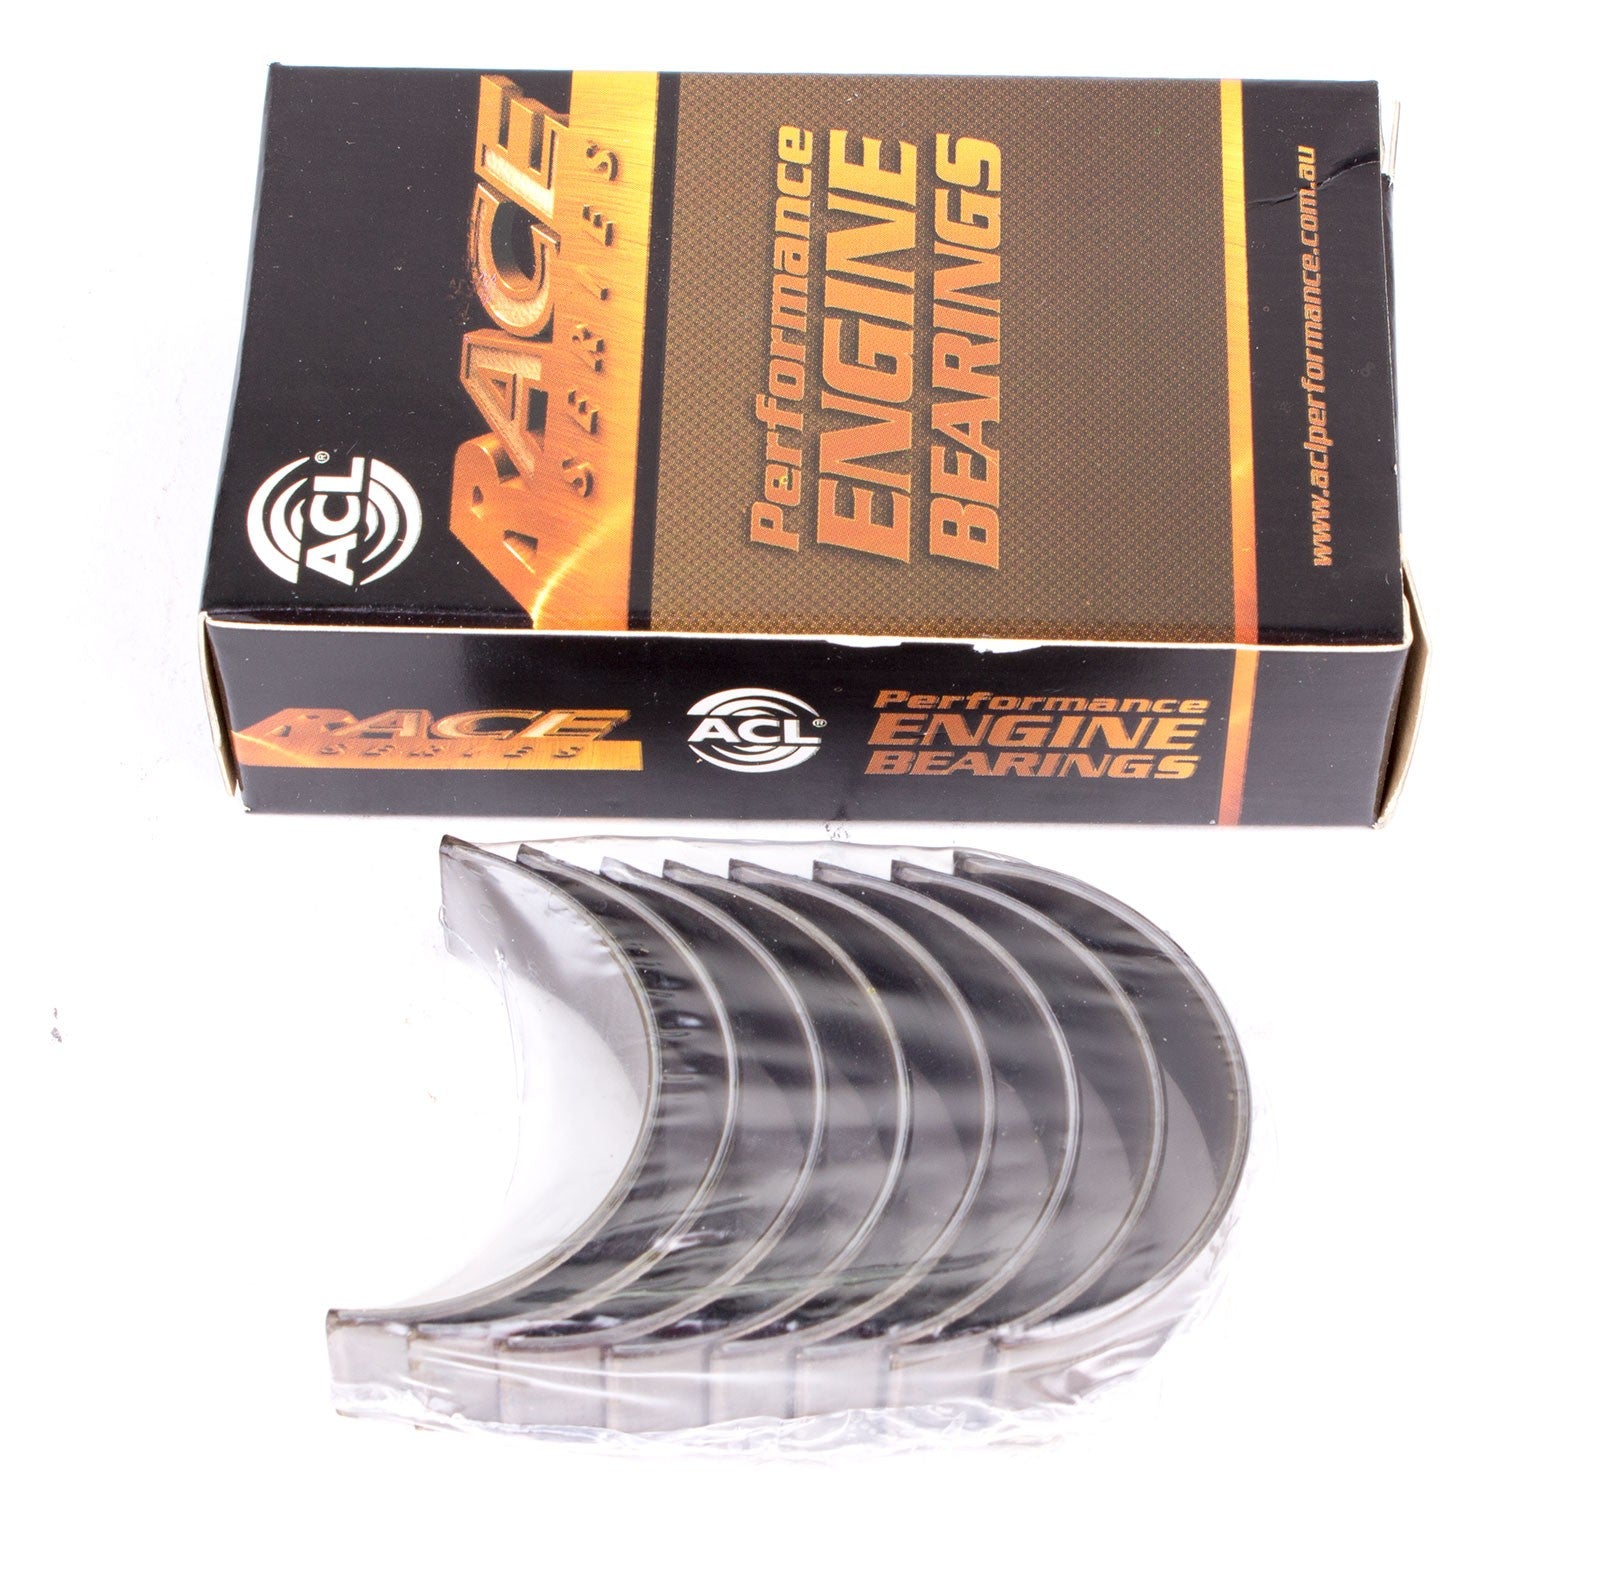 ACL 5M1039H-010 Main bearing set (ACL Race Series) Photo-0 